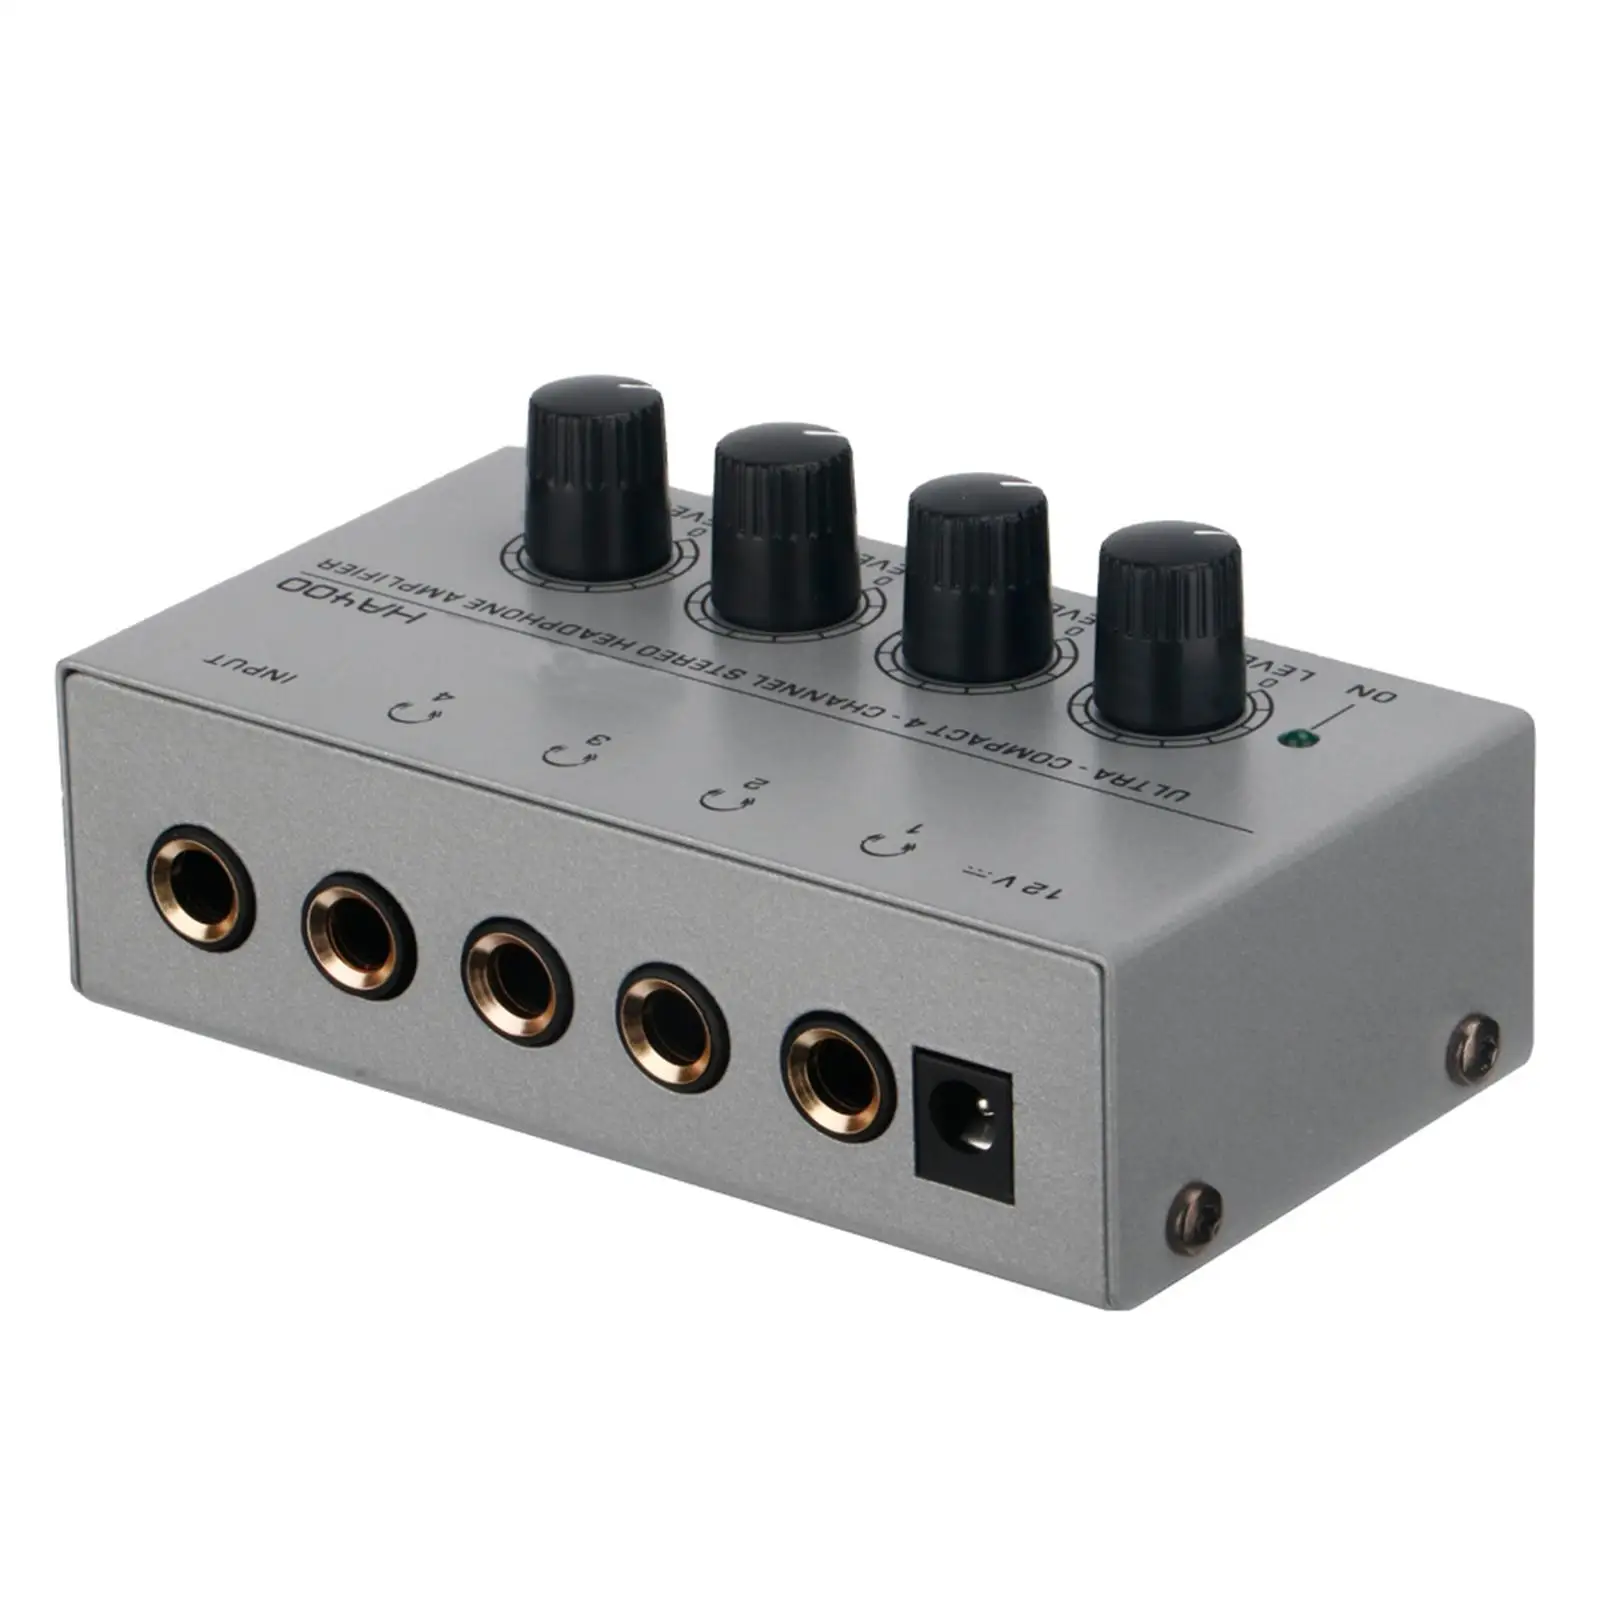 4 Output Headphone amp Mixer Stereo Portable Low Noise for Stage Performances Music